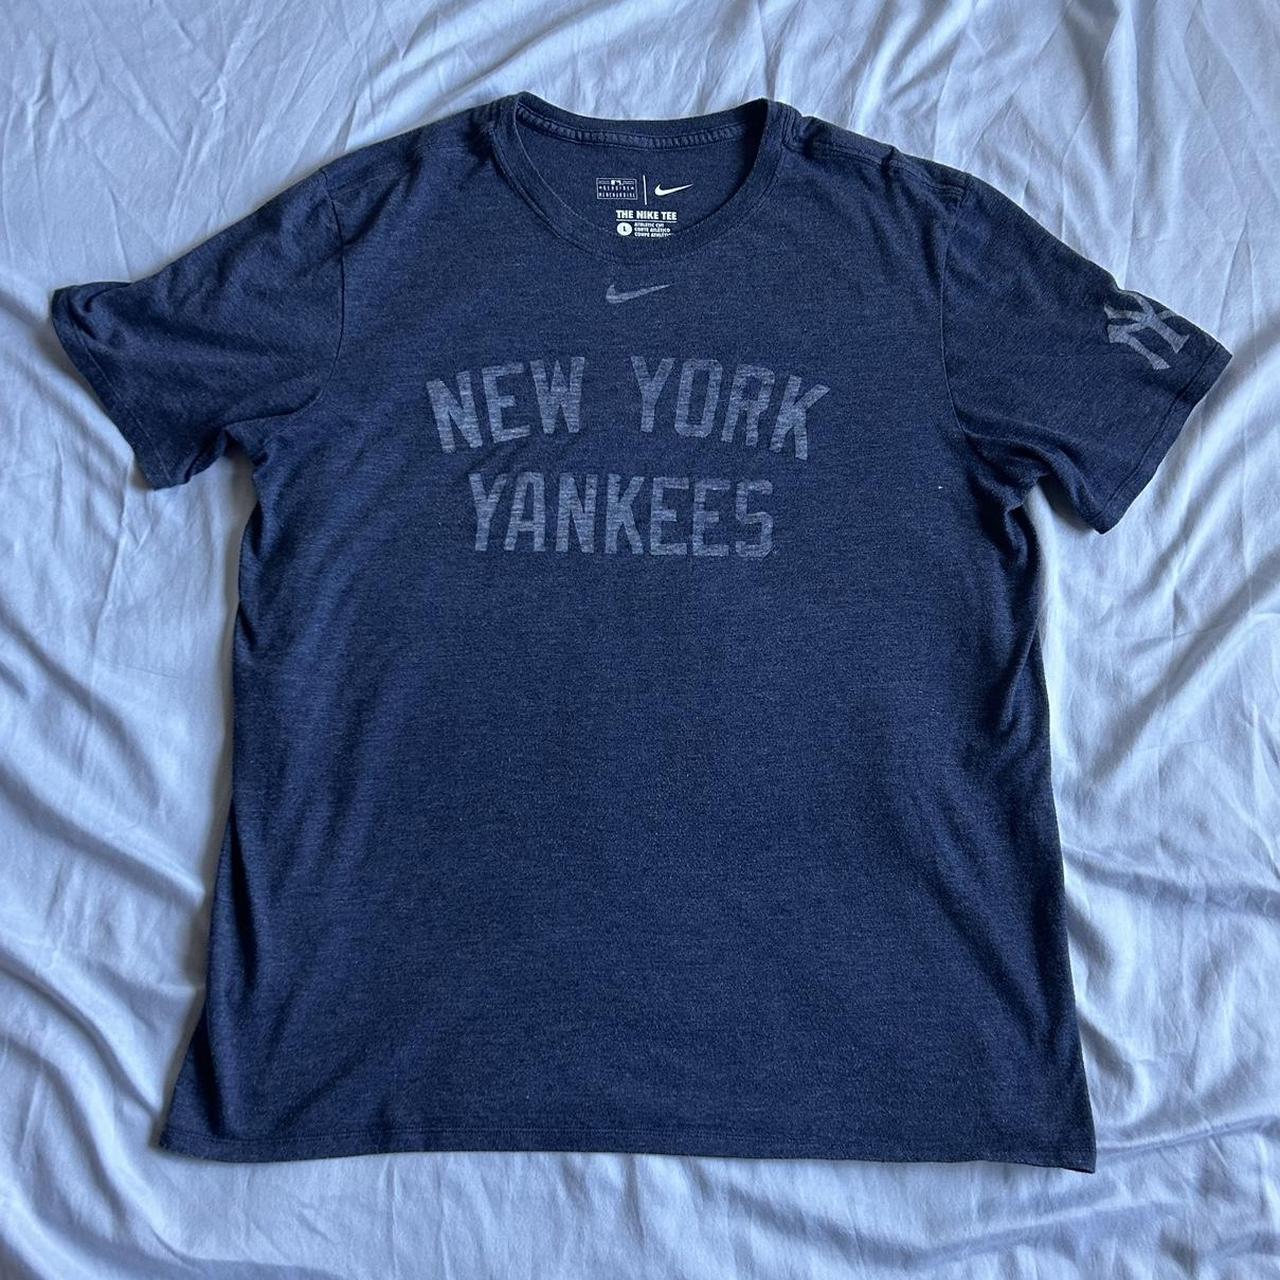 Nike Men's Navy and Blue T-shirt